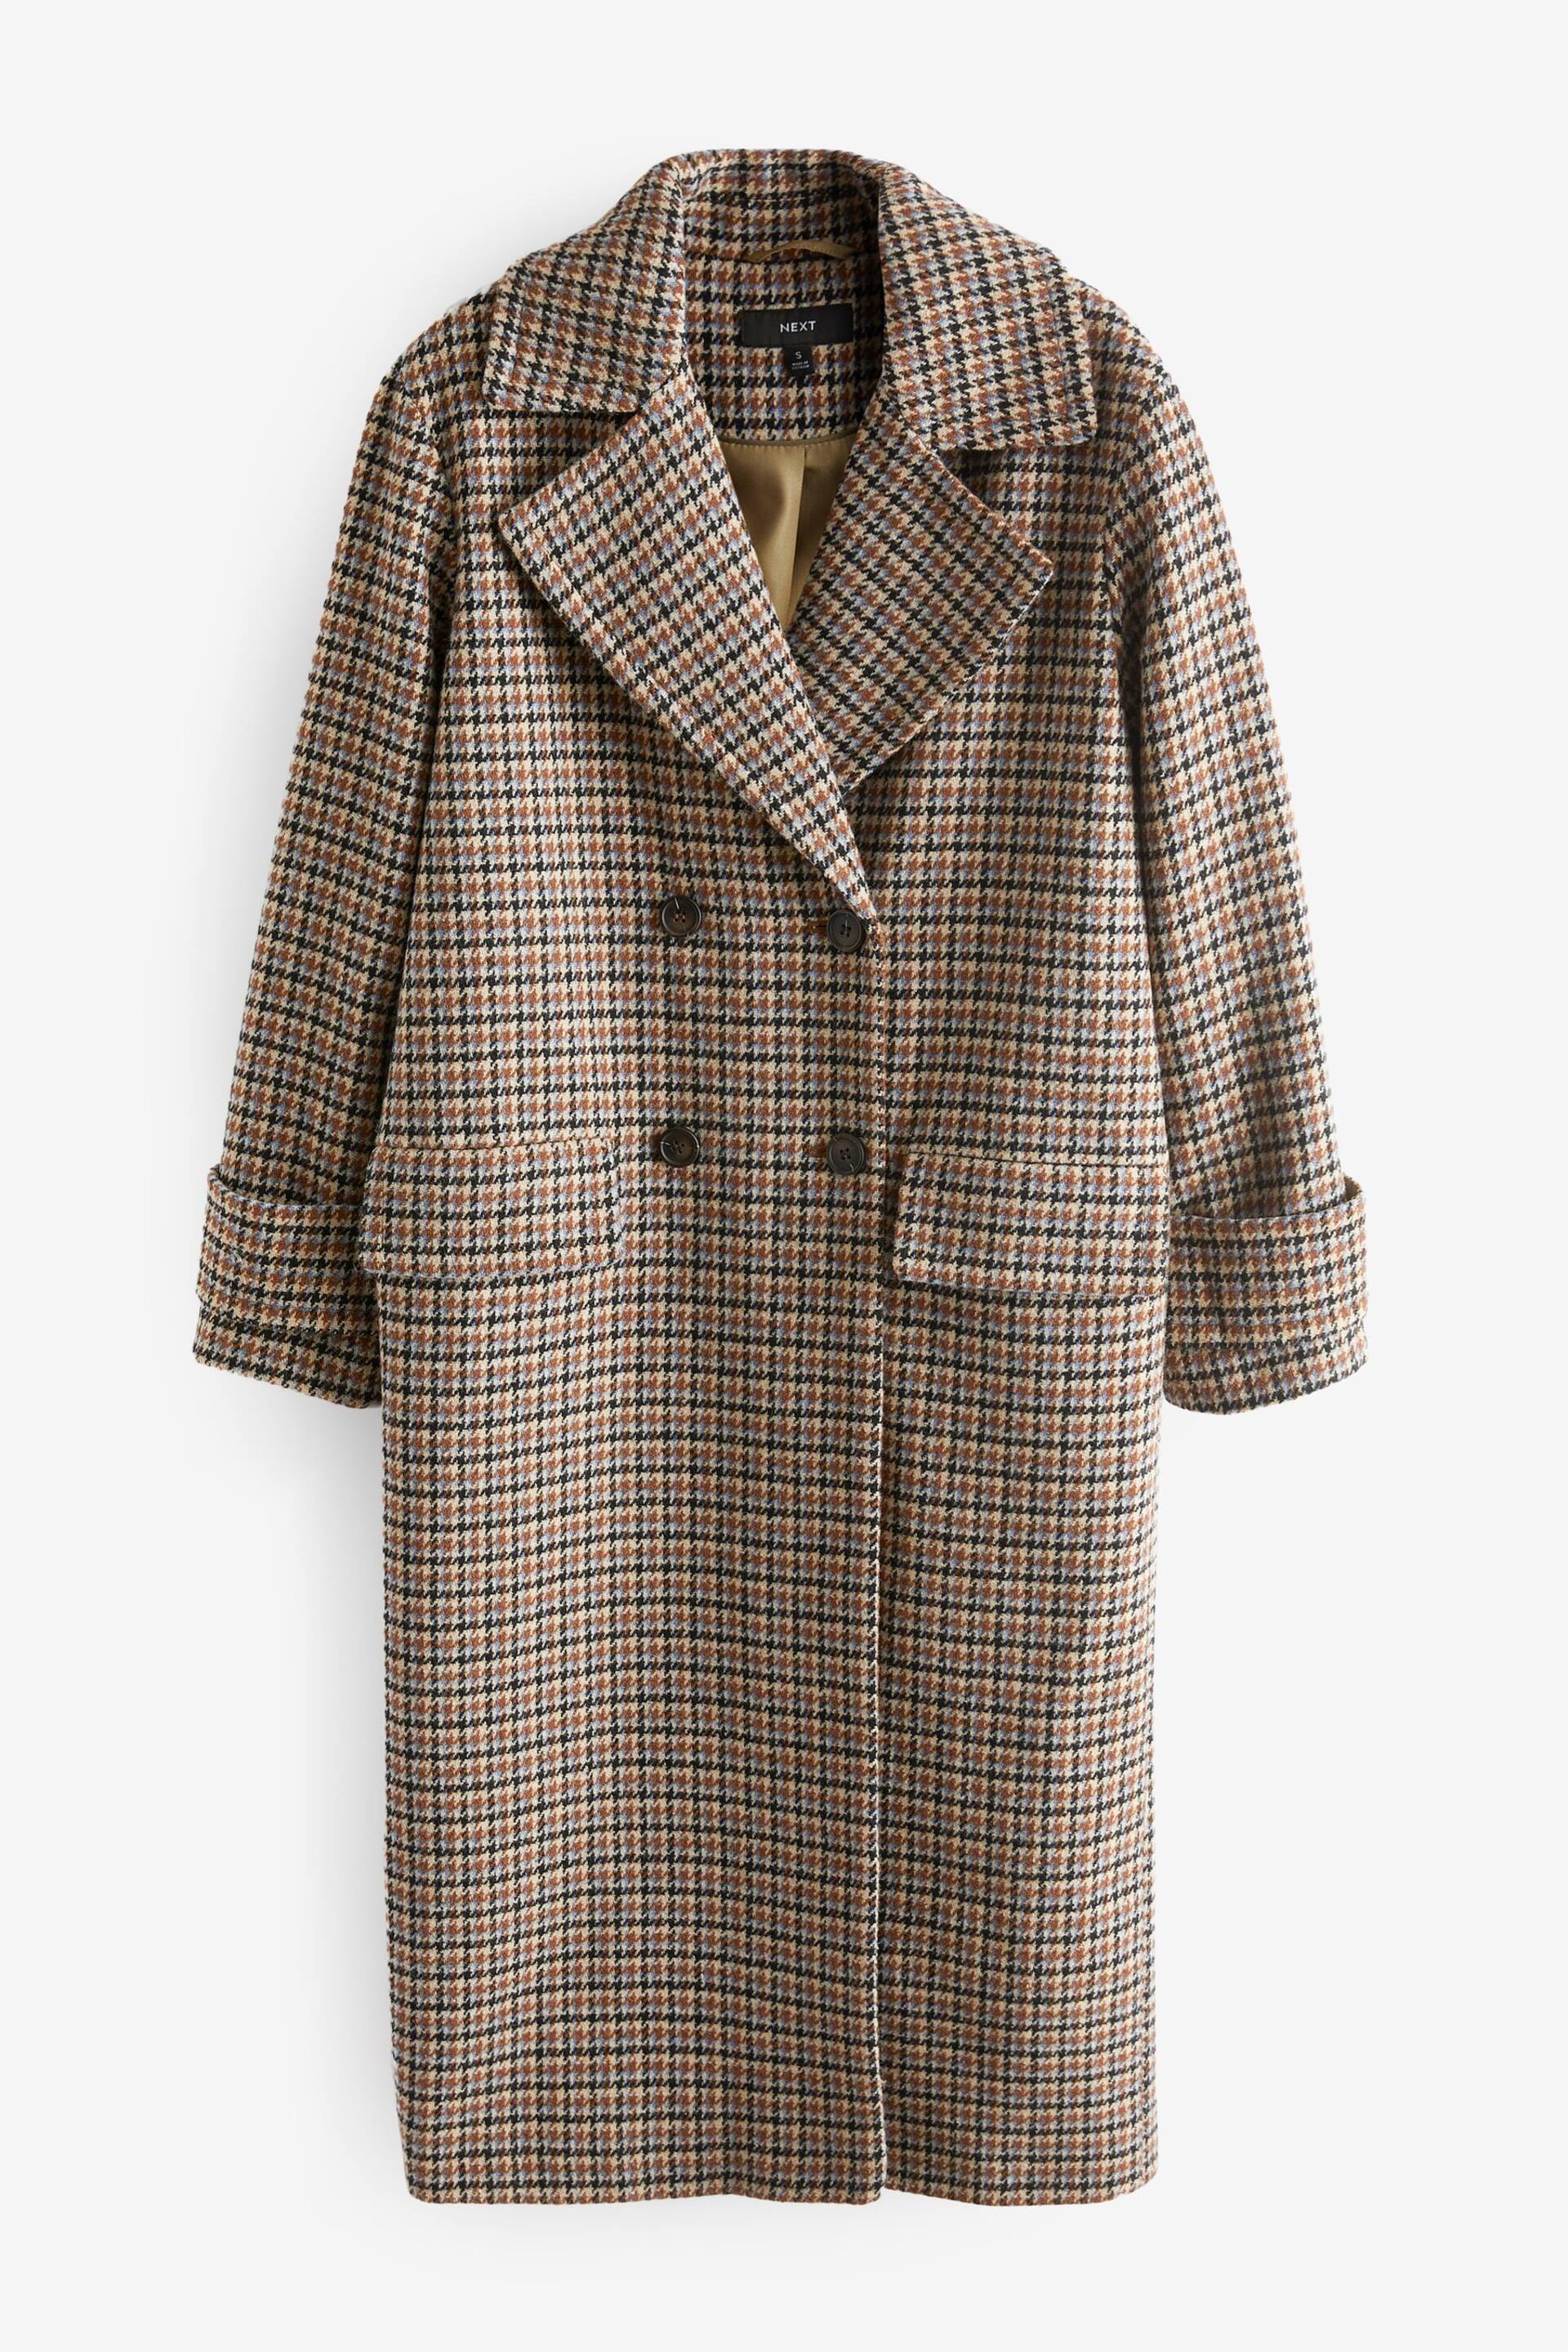 Brown Heritage Check Overcoat - Image 6 of 7